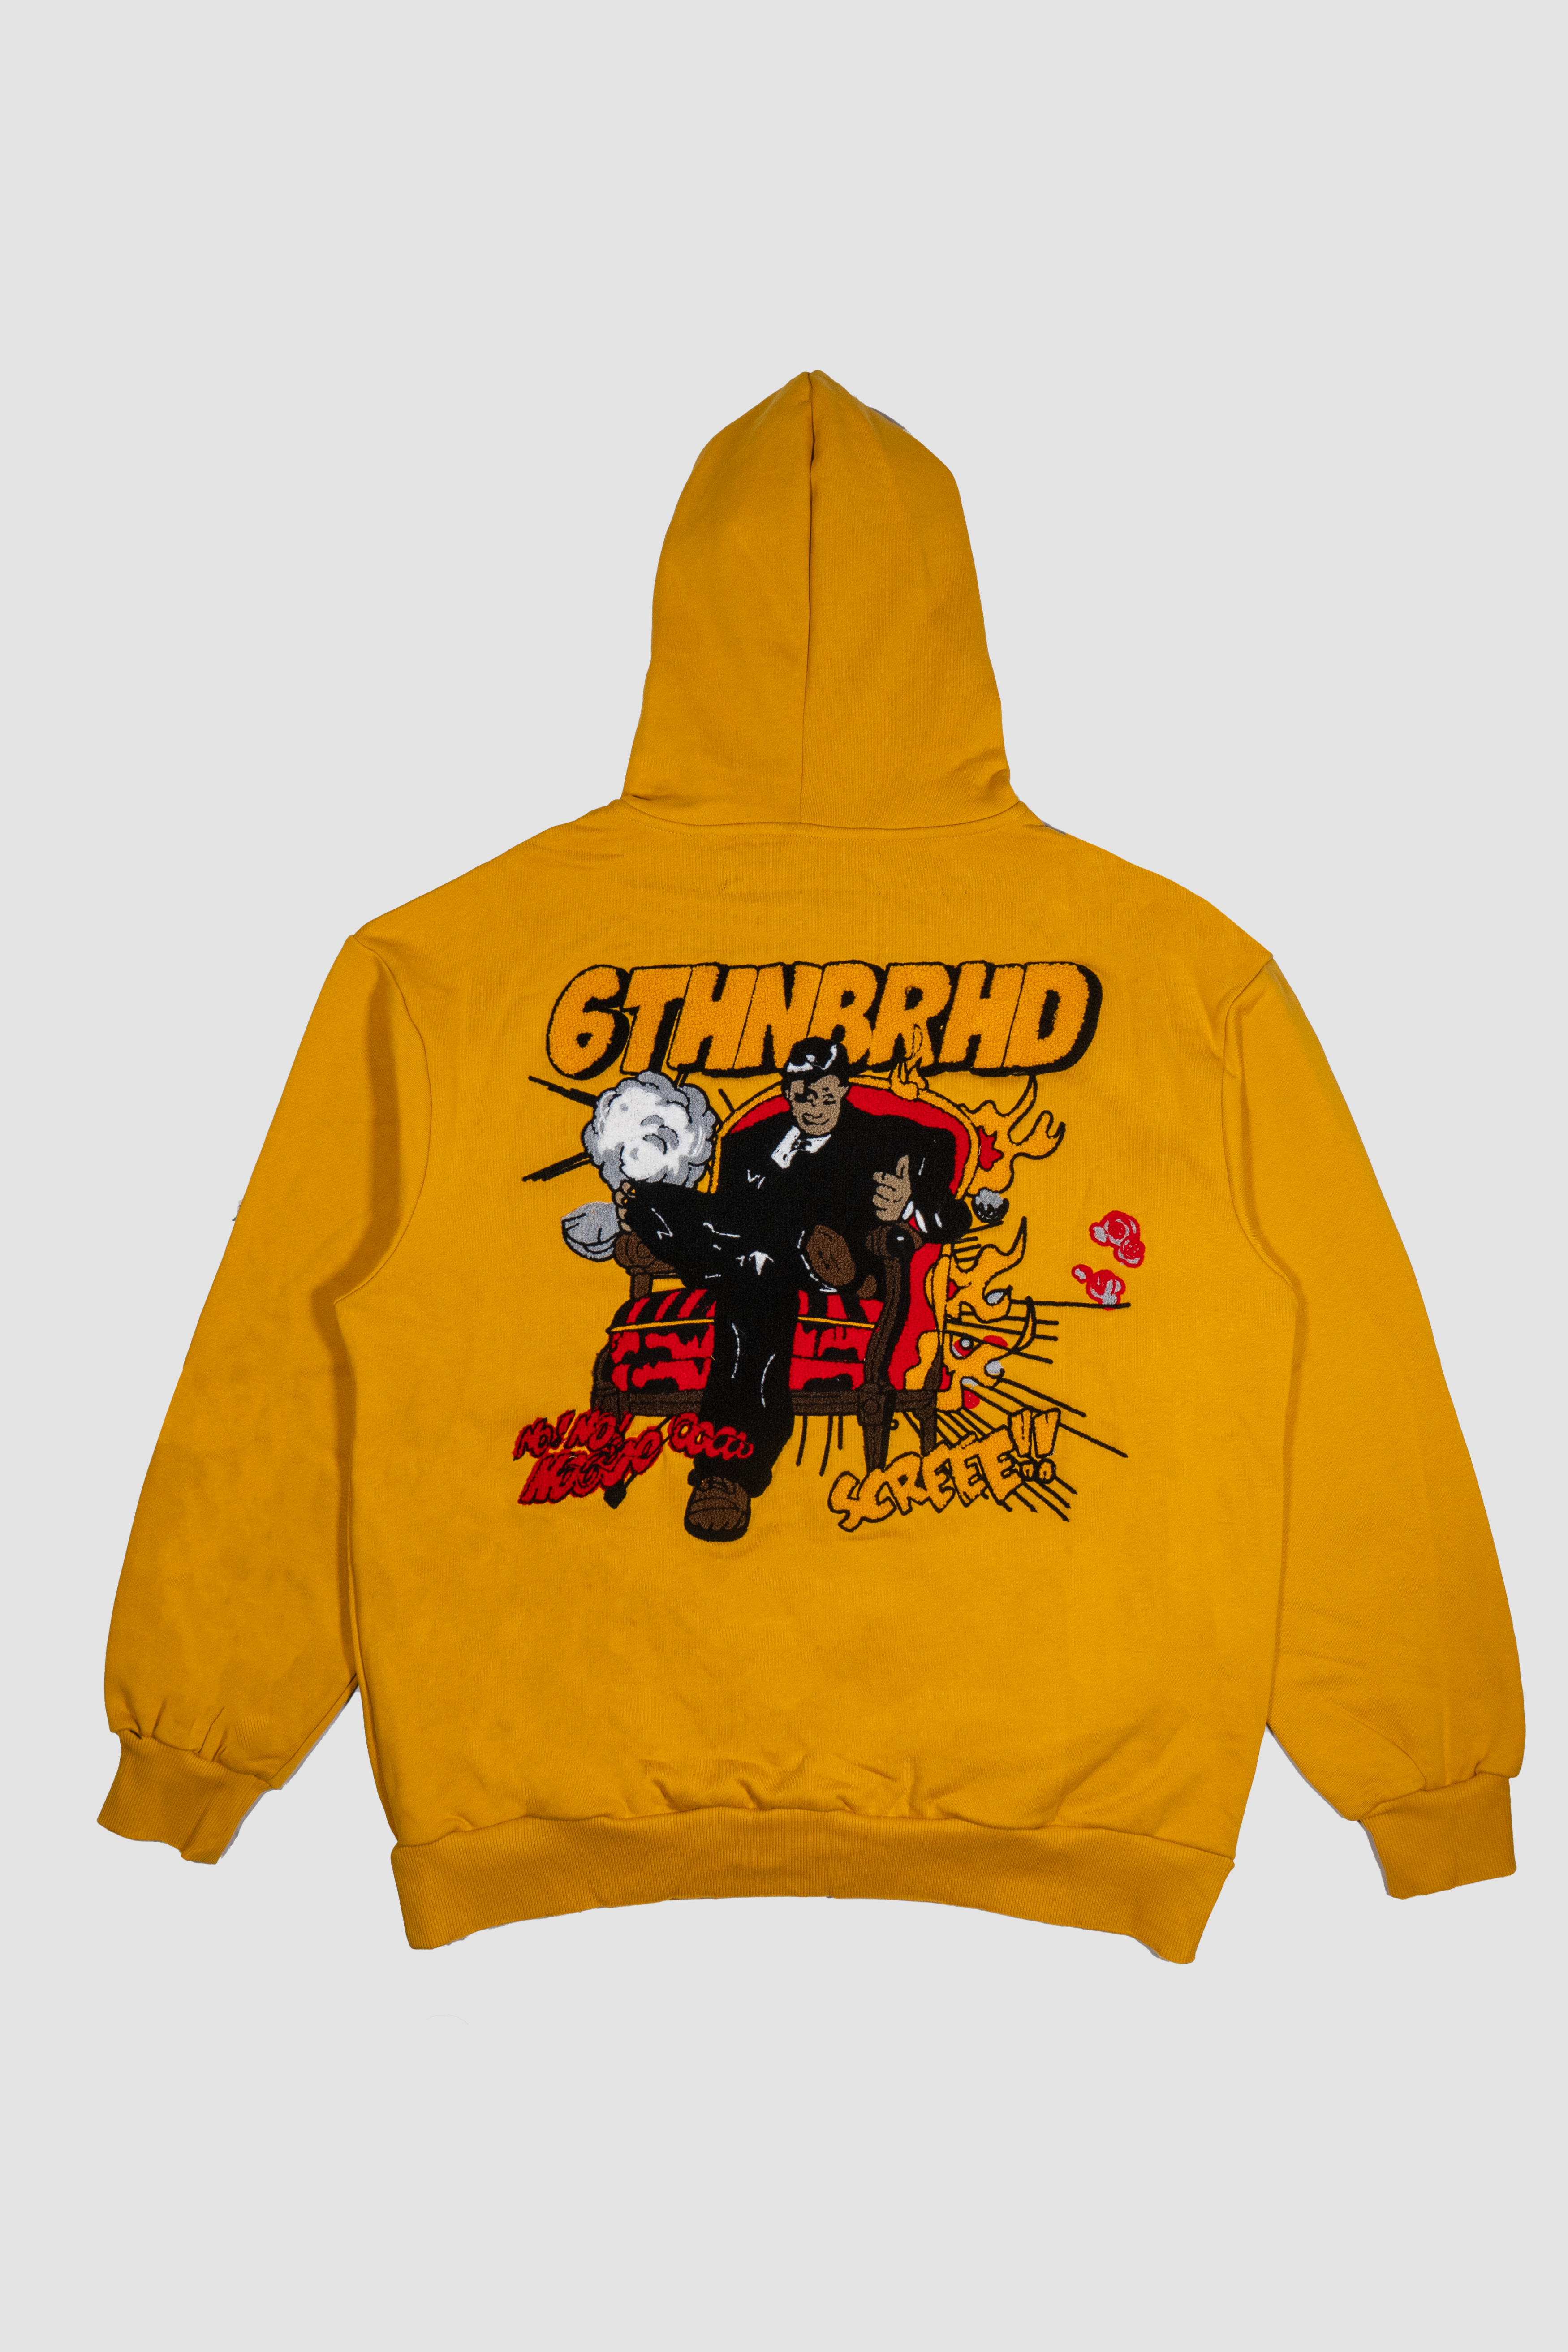 6thNBRHD PULLOVER "TWO SIDES" YELLOW